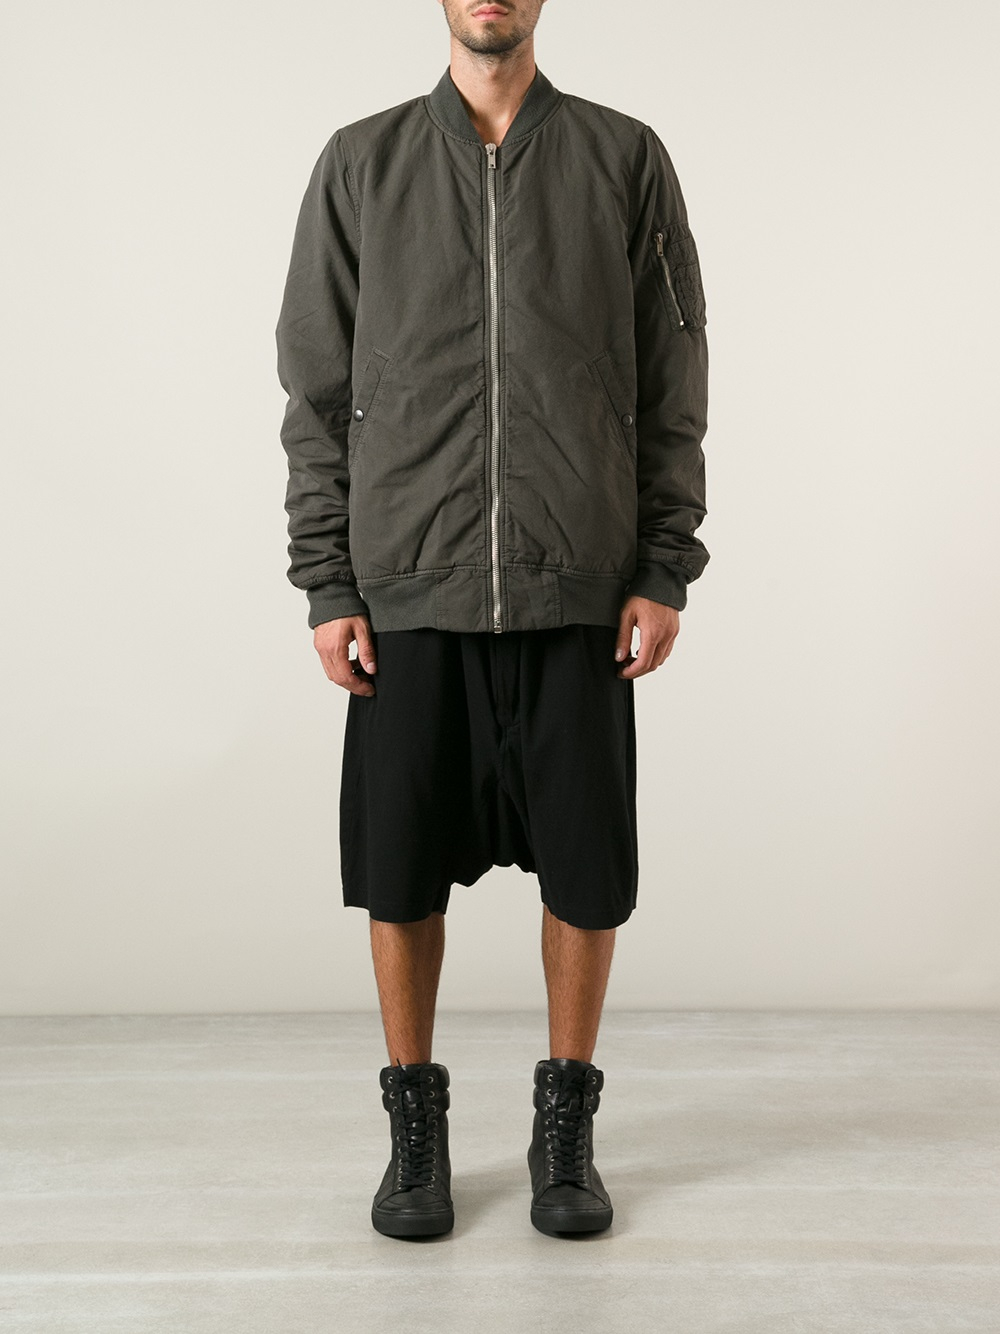 Lyst - Drkshdw By Rick Owens Bomber Jacket in Gray for Men